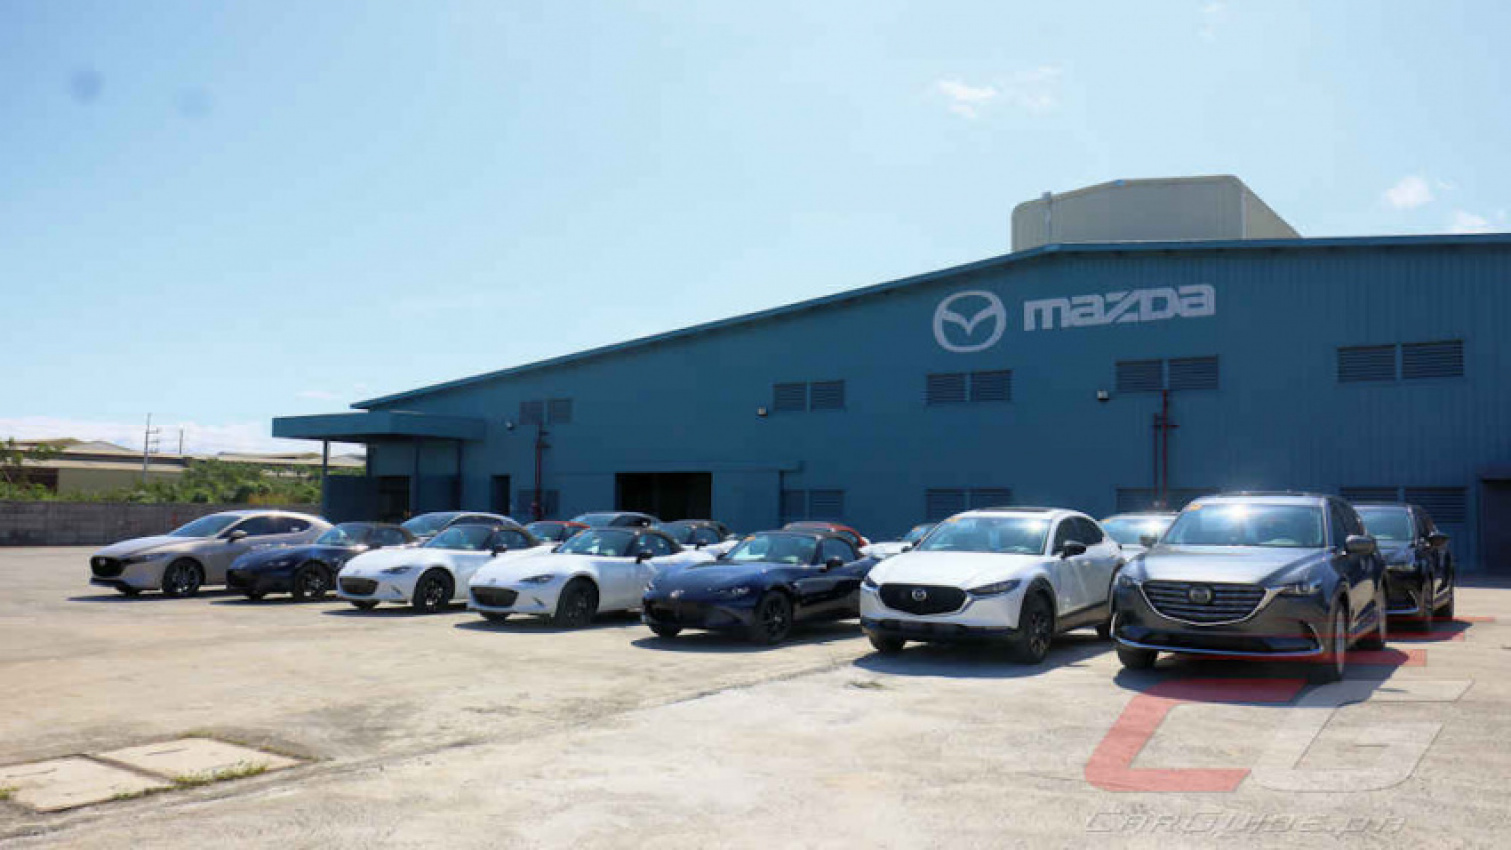 autos, cars, mazda, mazda 2, mazda 3, mazda bt-50, mazda corporate, mazda cx-30, mazda cx-8, mazda cx-9, mazda mx-5, news, after a prolonged wait, mazda customers in the philippines will finally get their brand-new cars